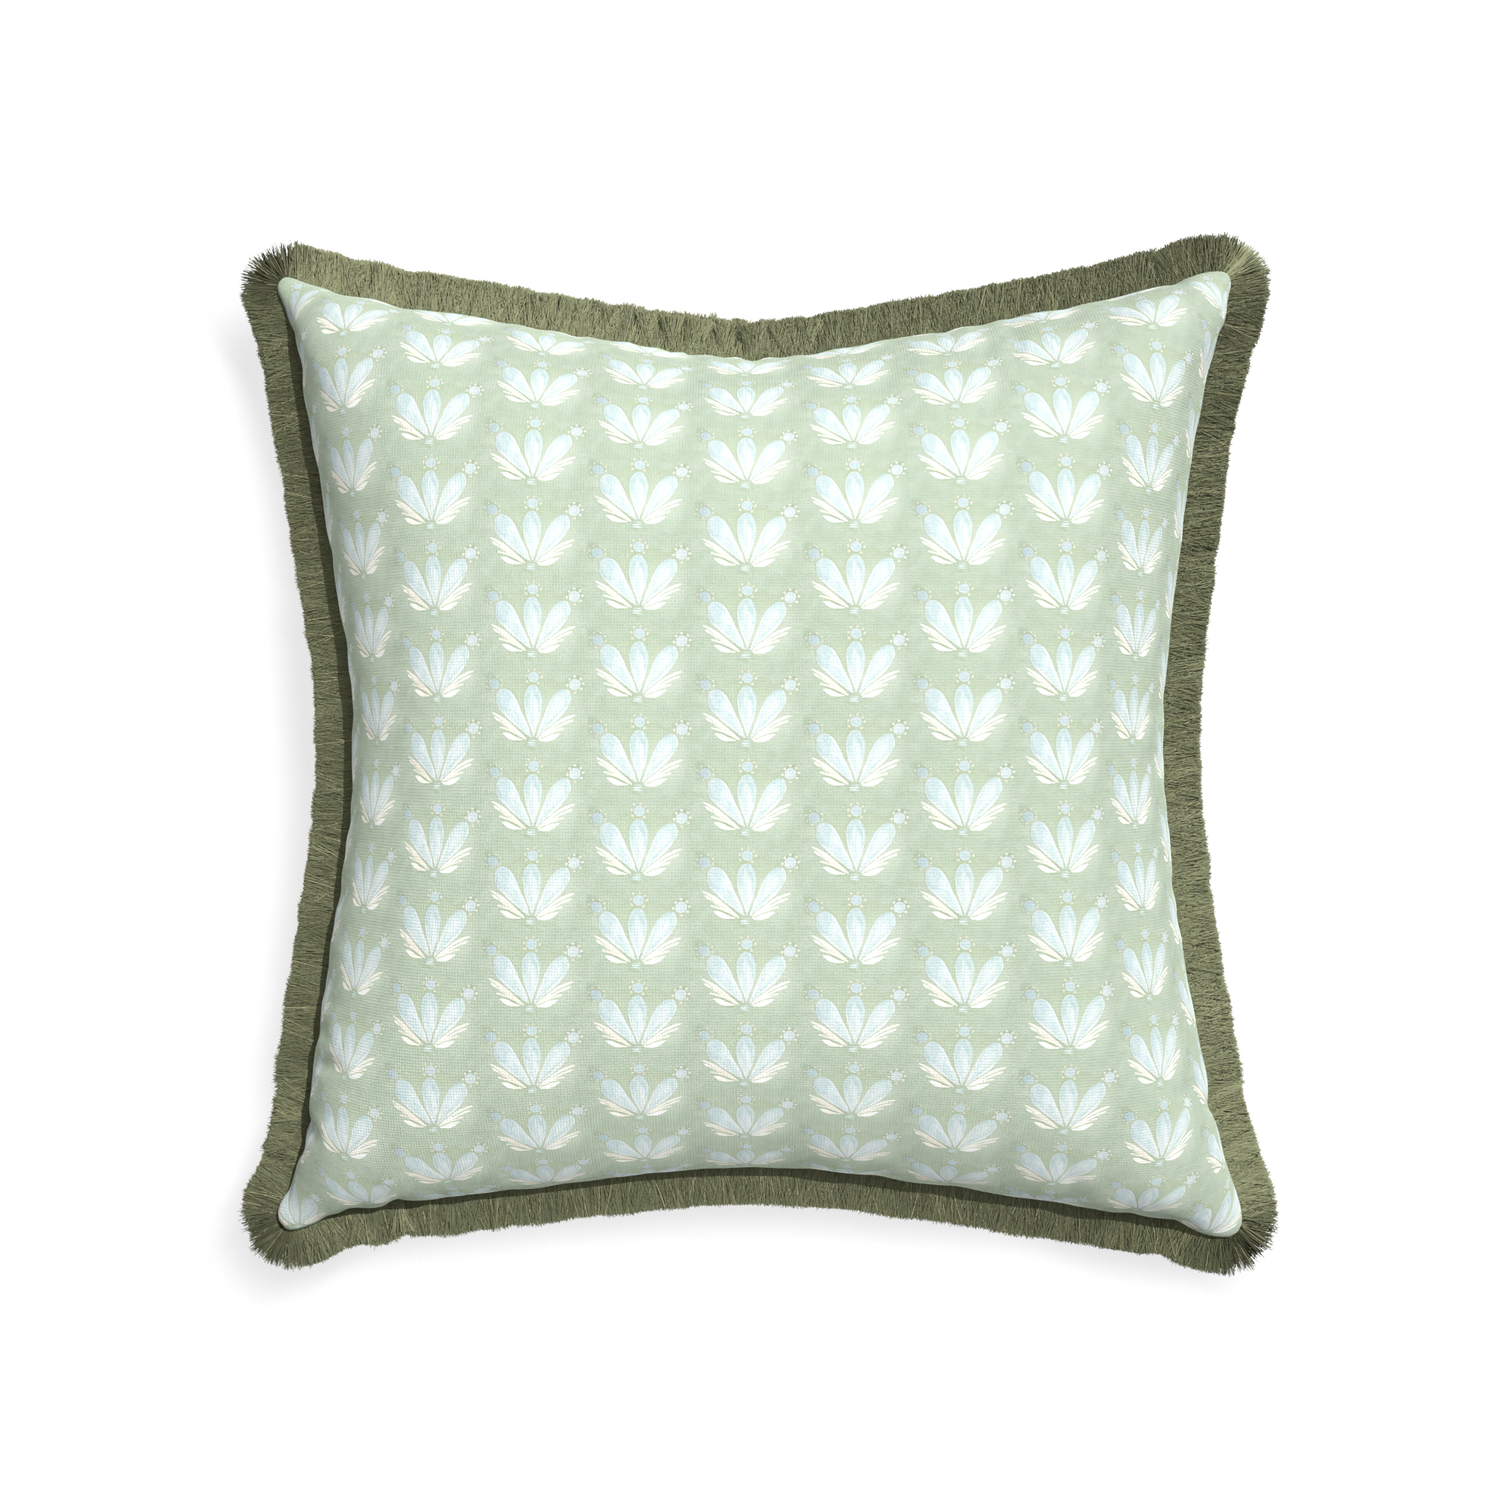 22-square serena sea salt custom blue & green floral drop repeatpillow with sage fringe on white background